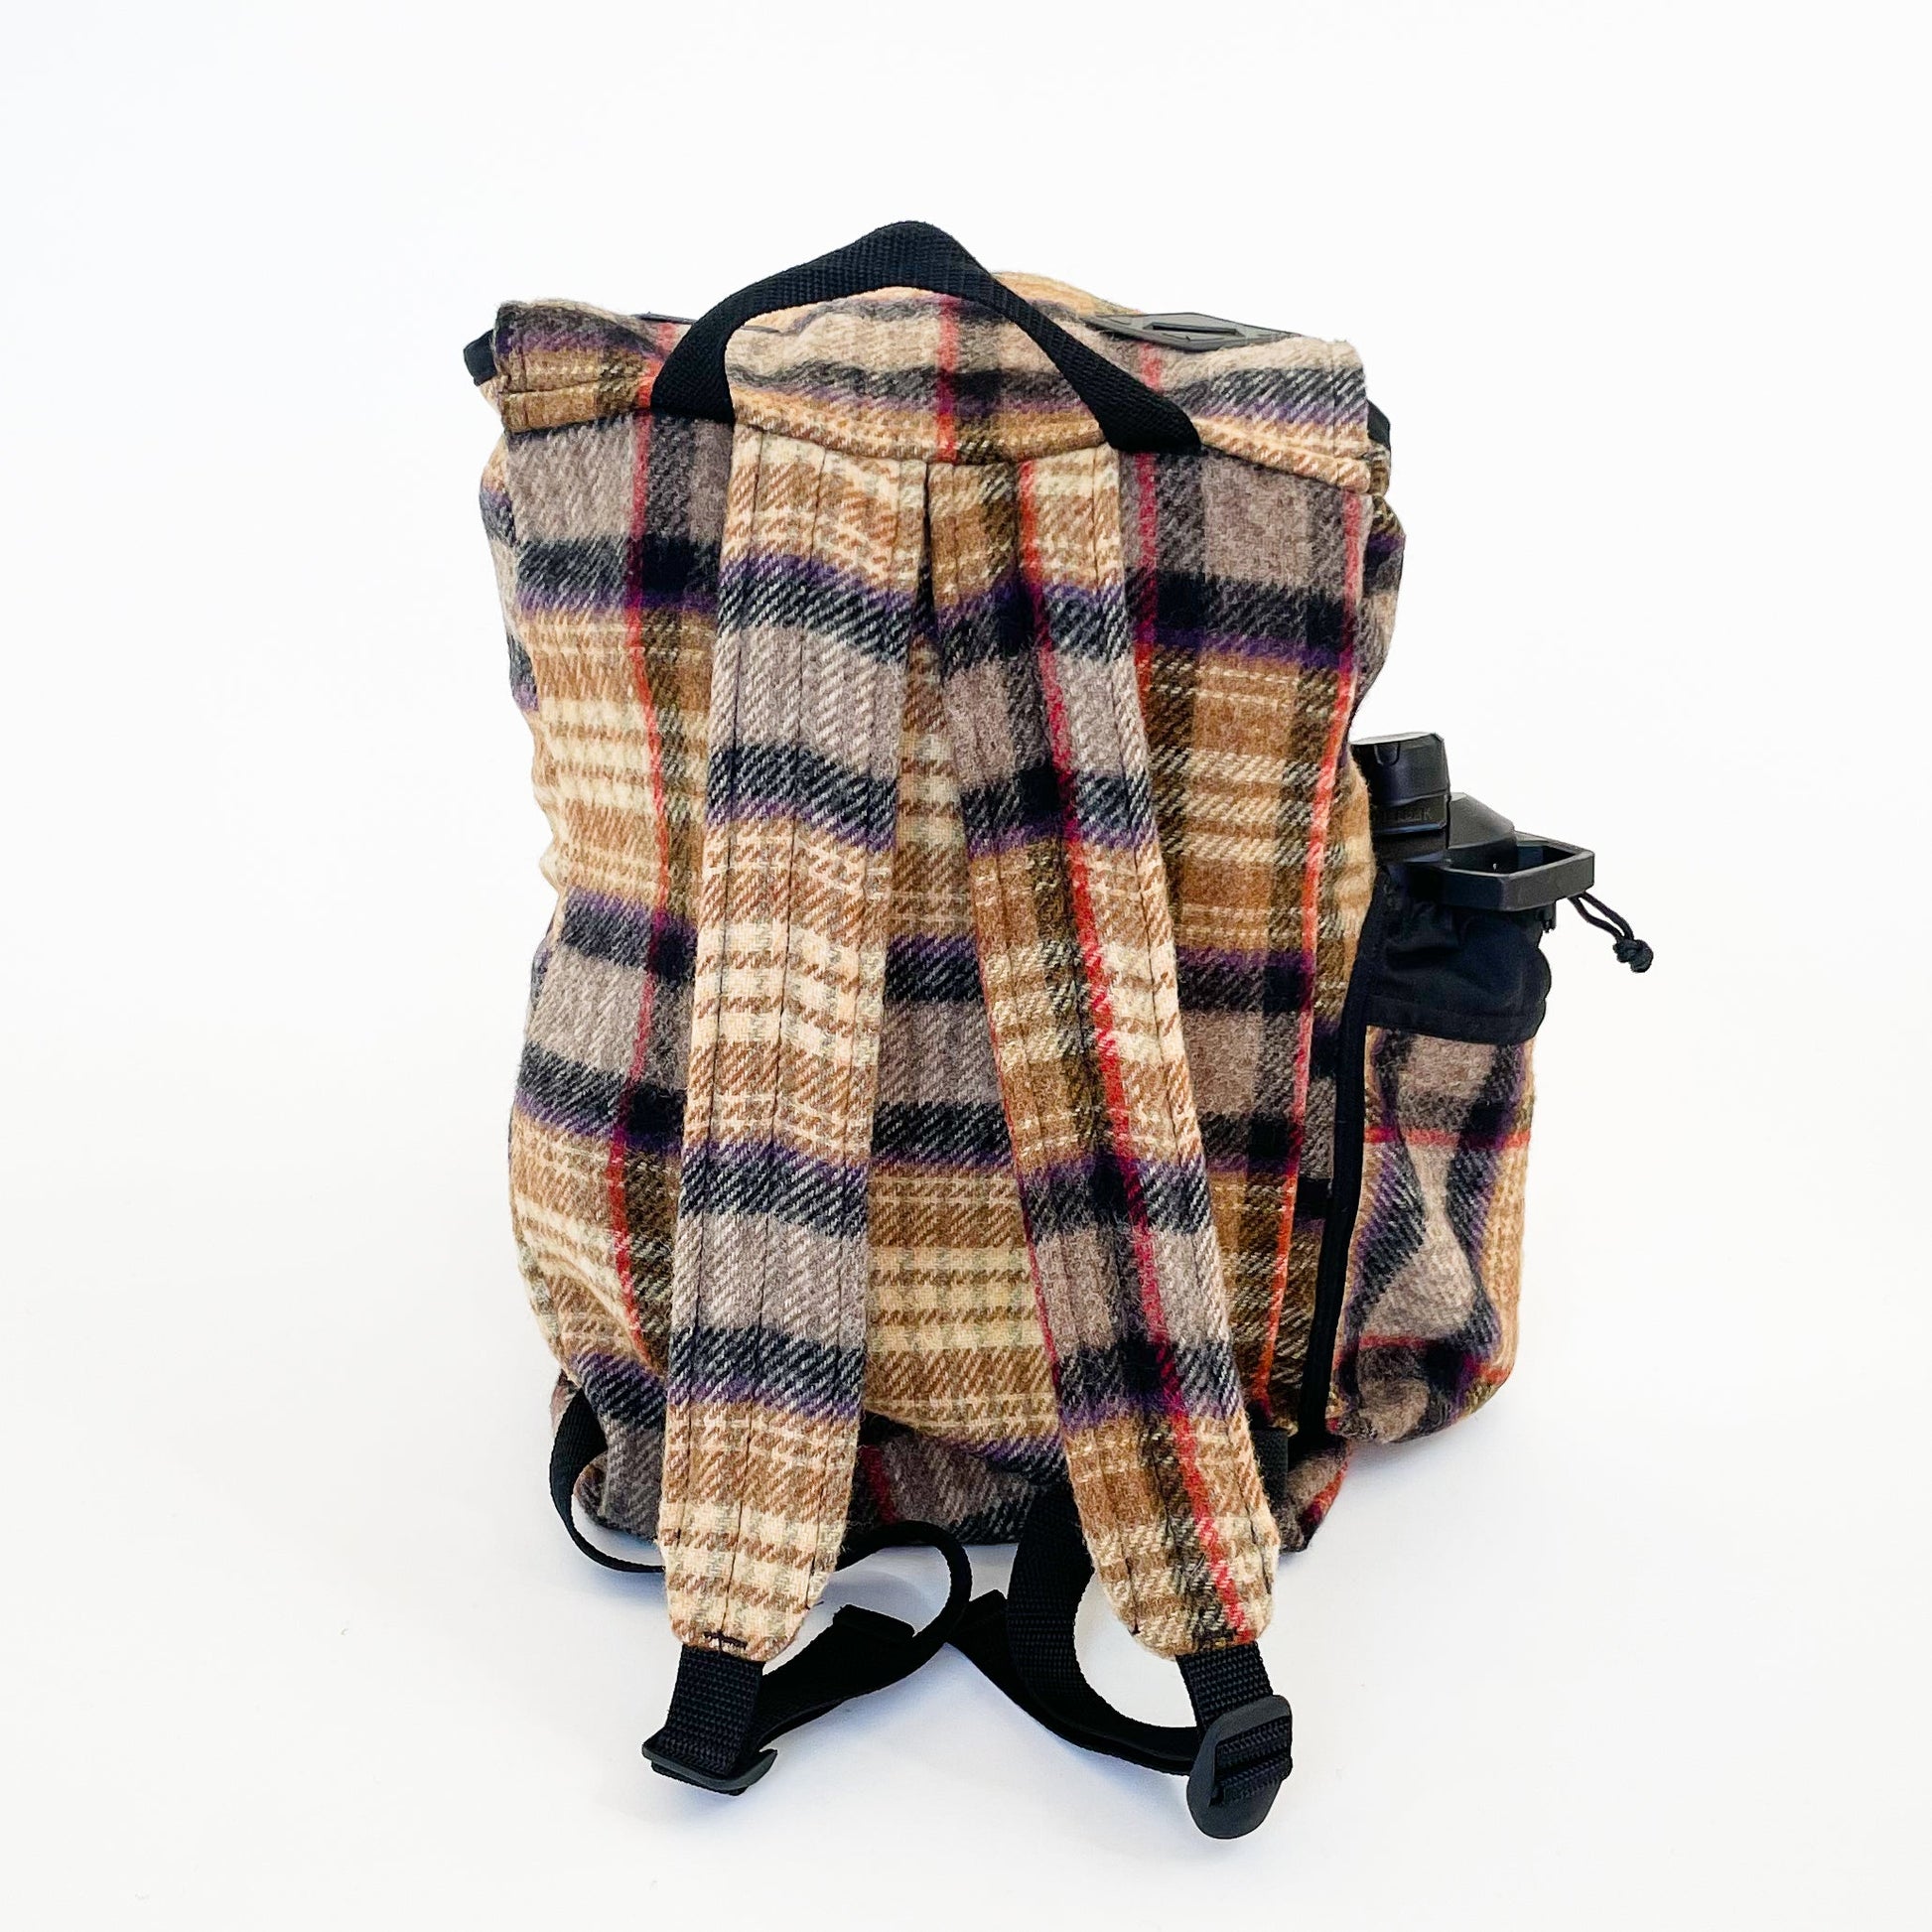 Wool back pack in gold, black and red plaid, shown with water bottle in side pocket - back view